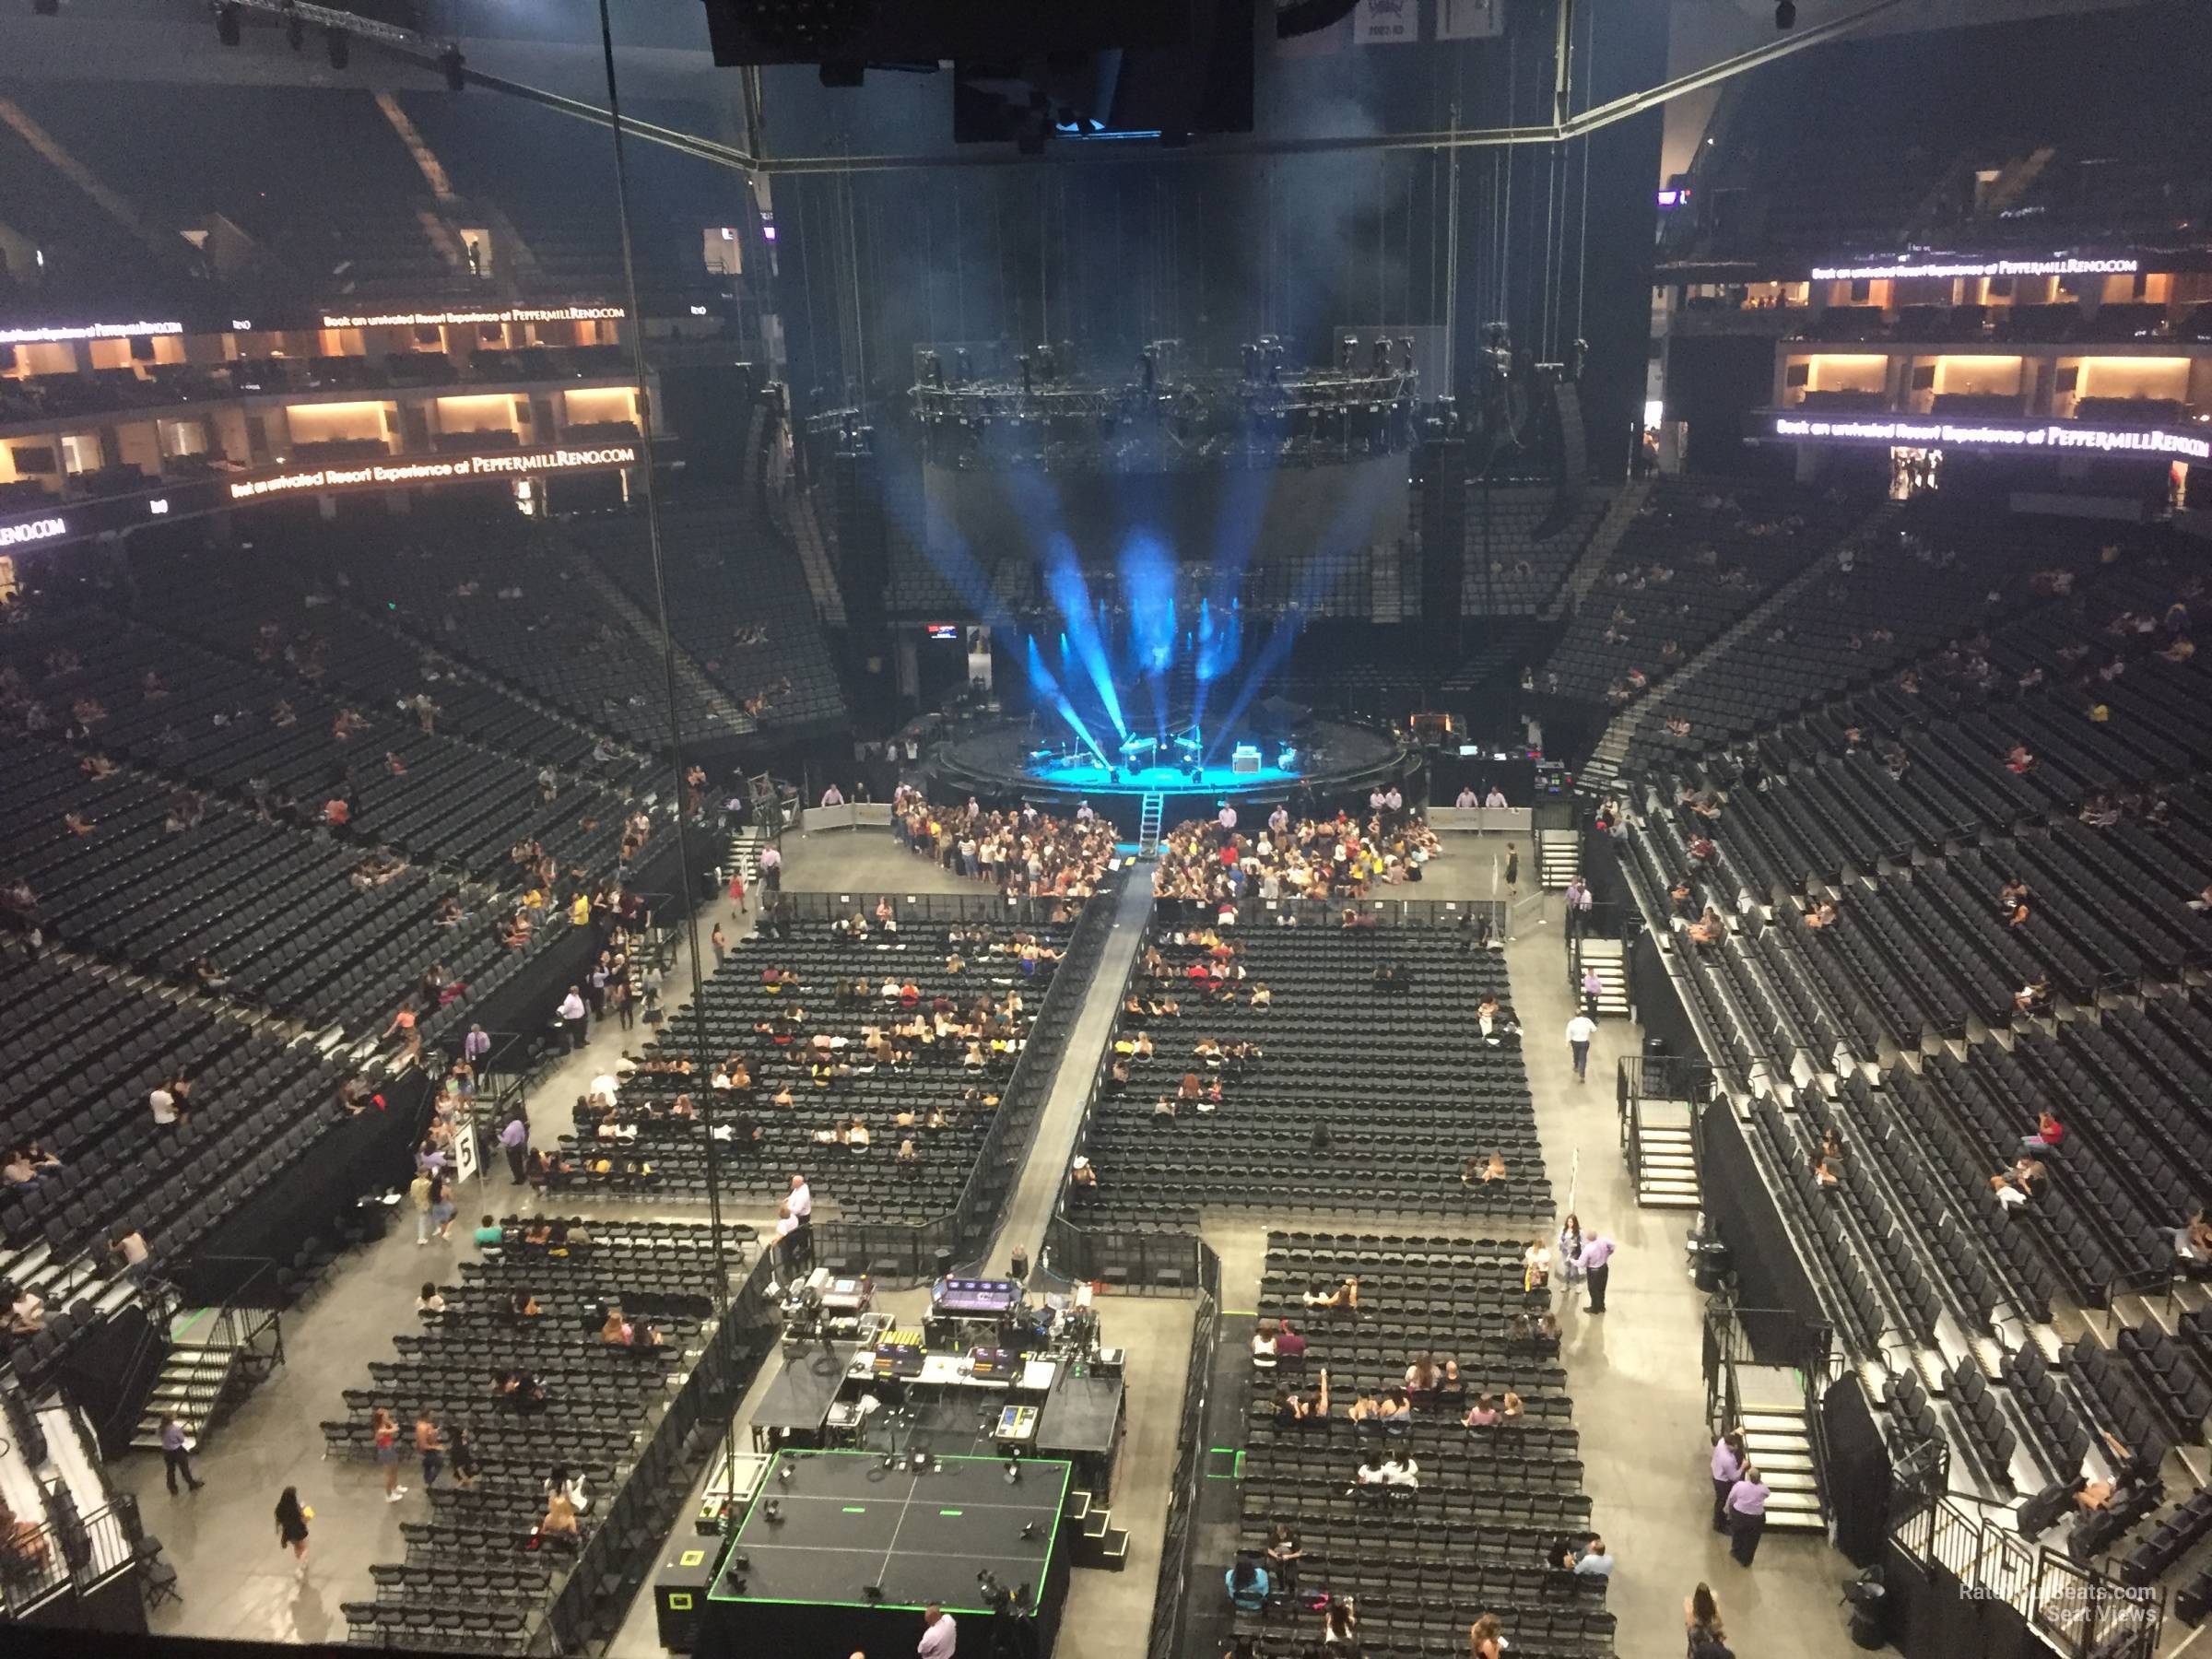 section 211, row c seat view  for concert - golden 1 center